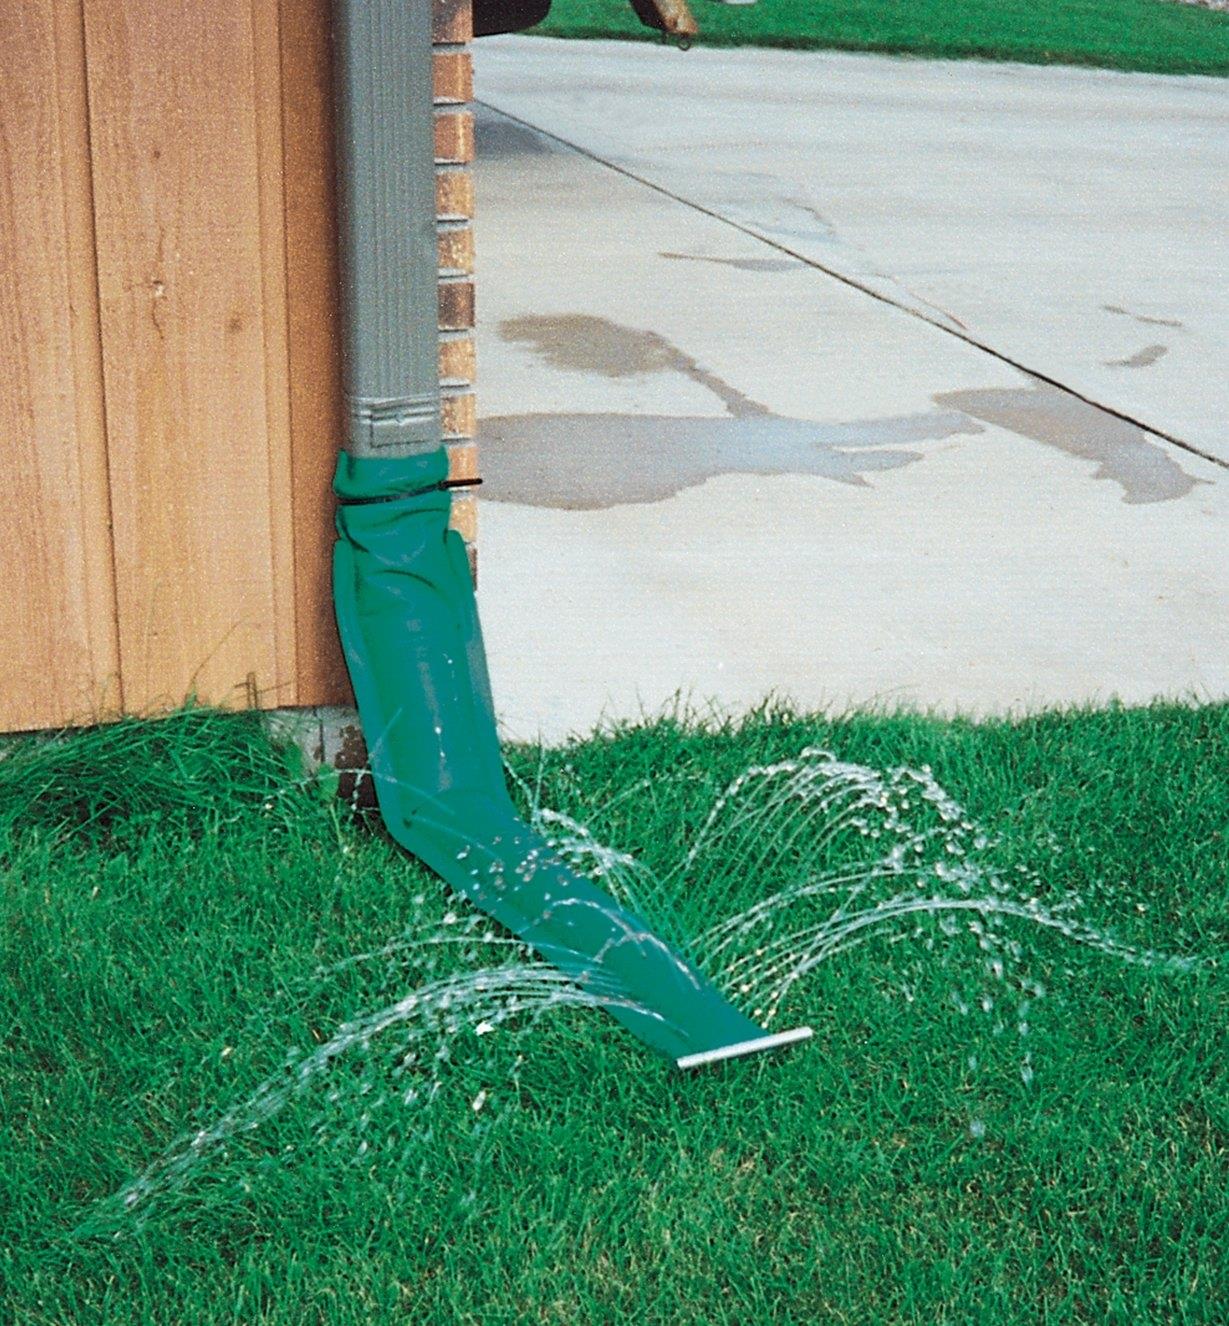 Recoil Downspout Sprinkler unrolled and sprinkling water on grass